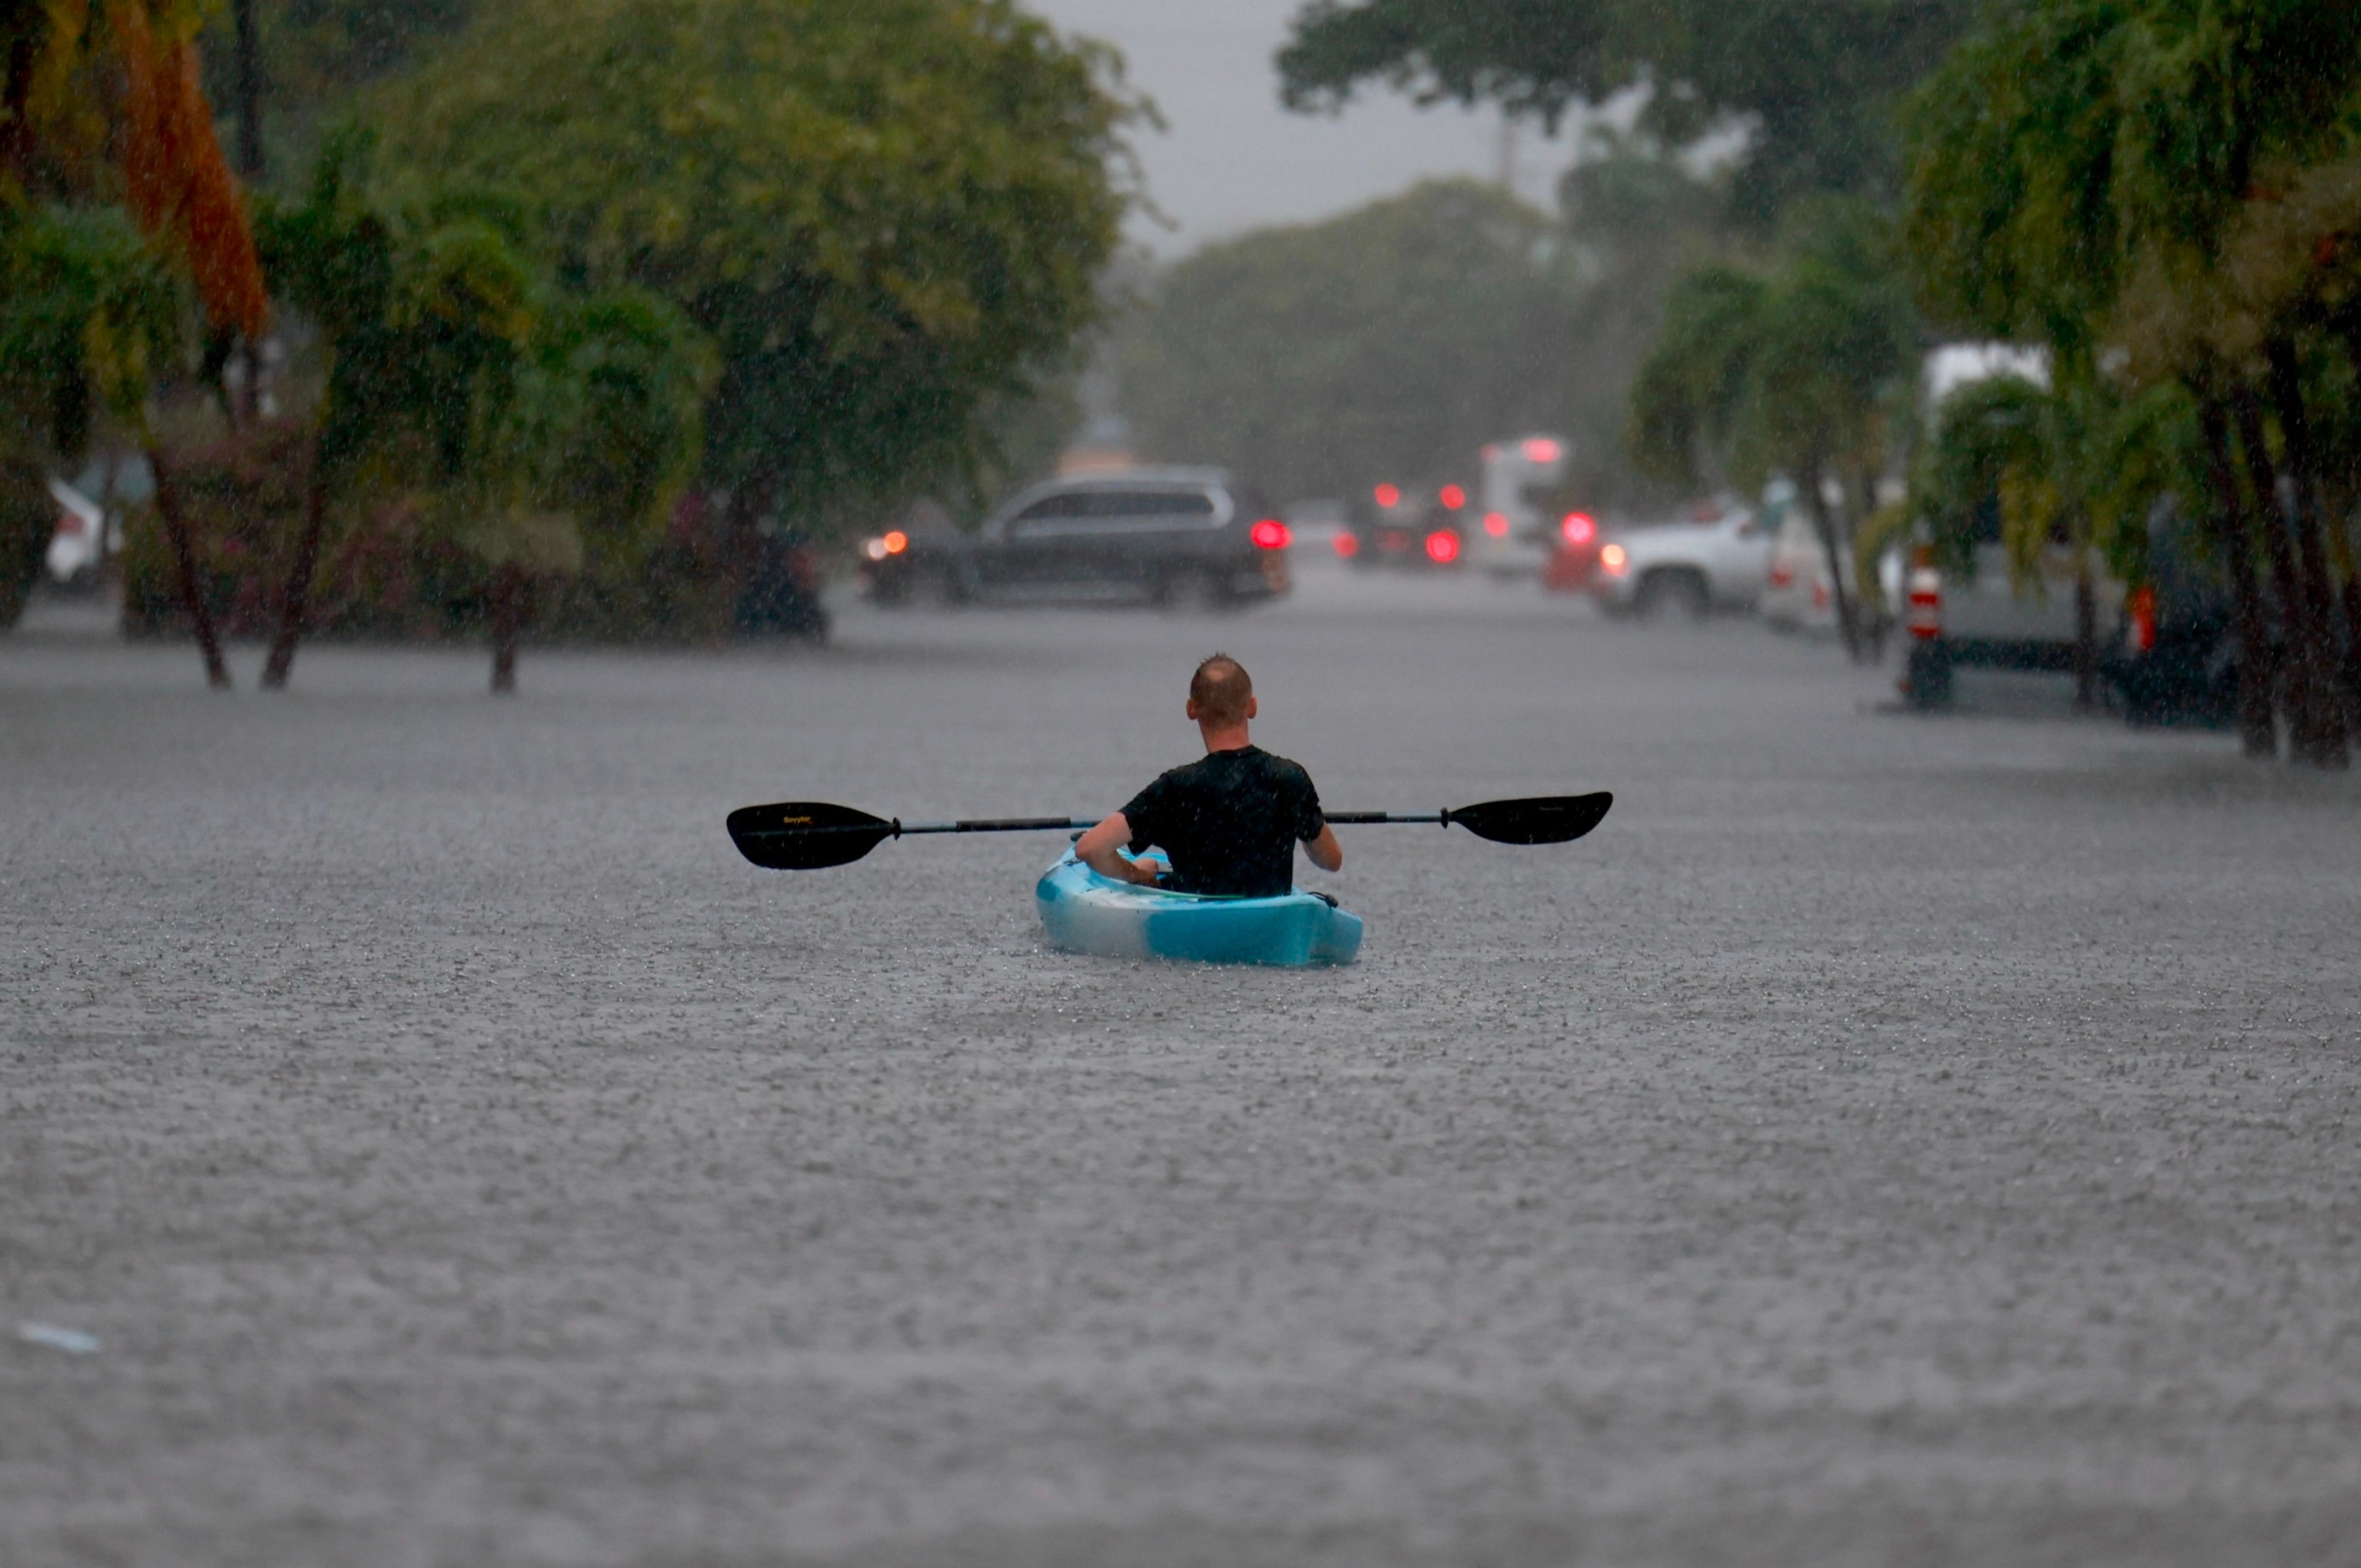 PHOTO: A person uses a kayak to float through a flooded street on June 12, 2024, in Hollywood, Florida. As tropical moisture passes through the area, areas have become flooded due to the heavy rain.